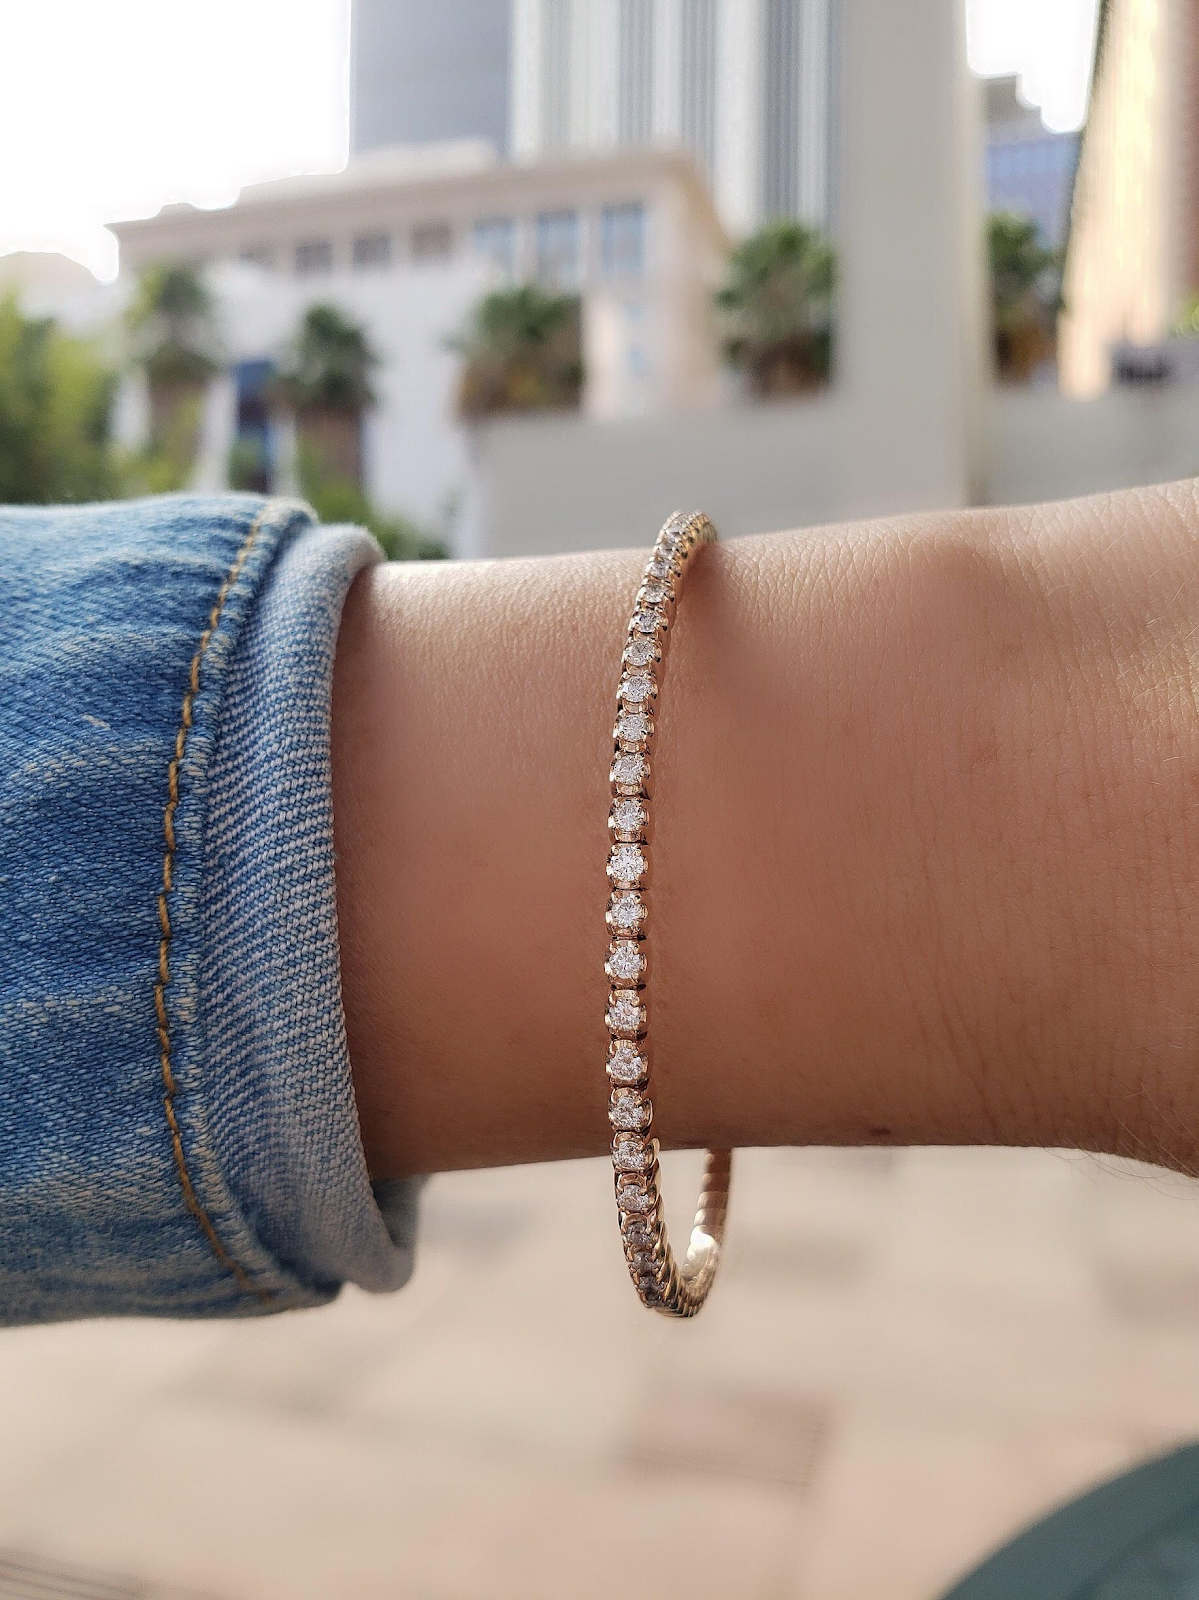 Our Ultimate Tennis Bracelet Buying Guide